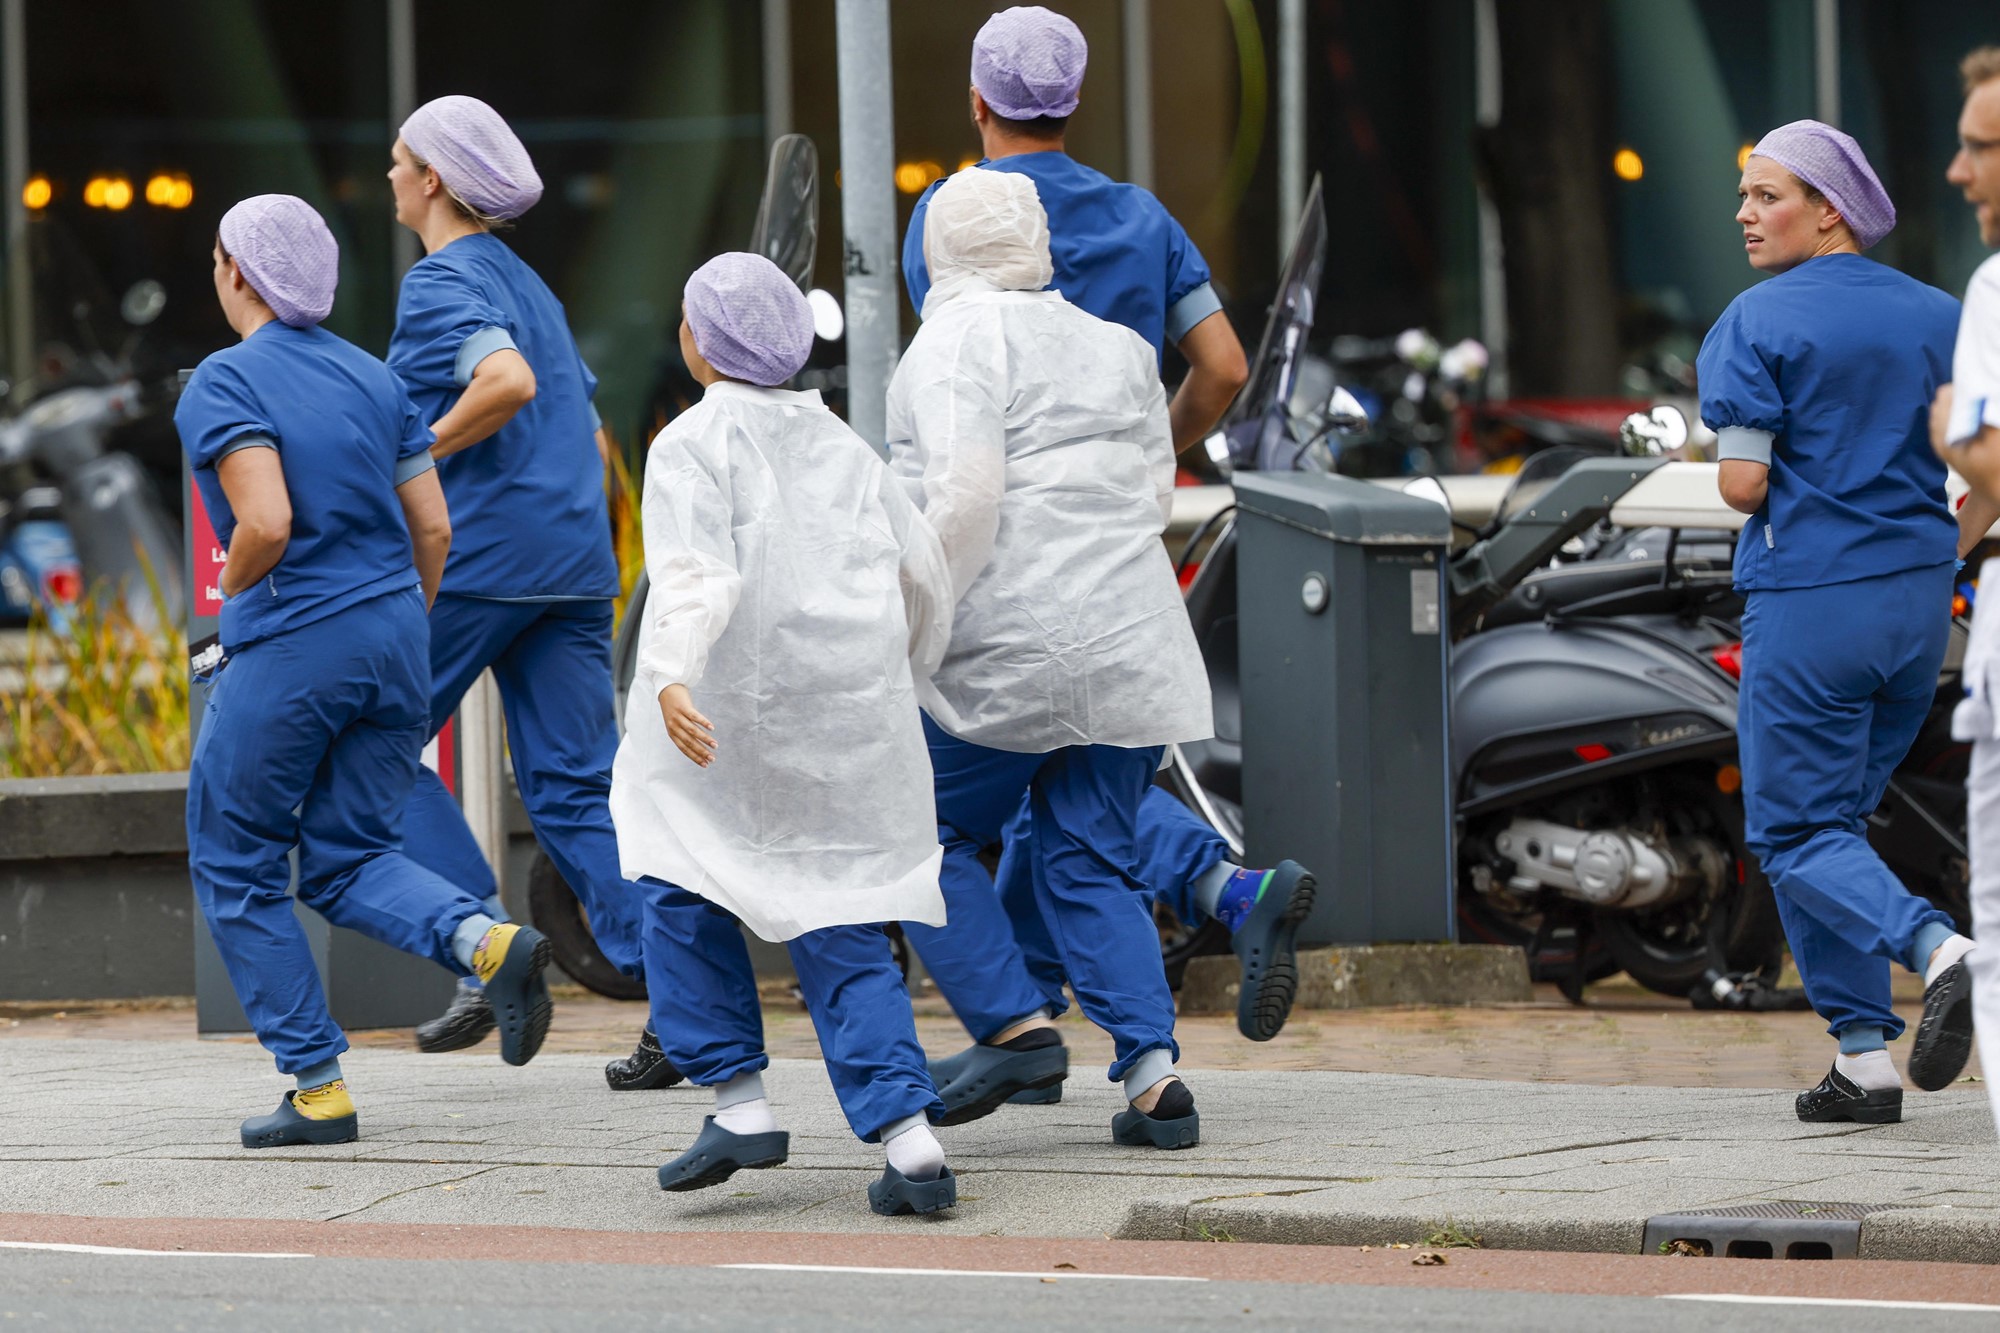 Medical staff rush outside in their blue scrubs.